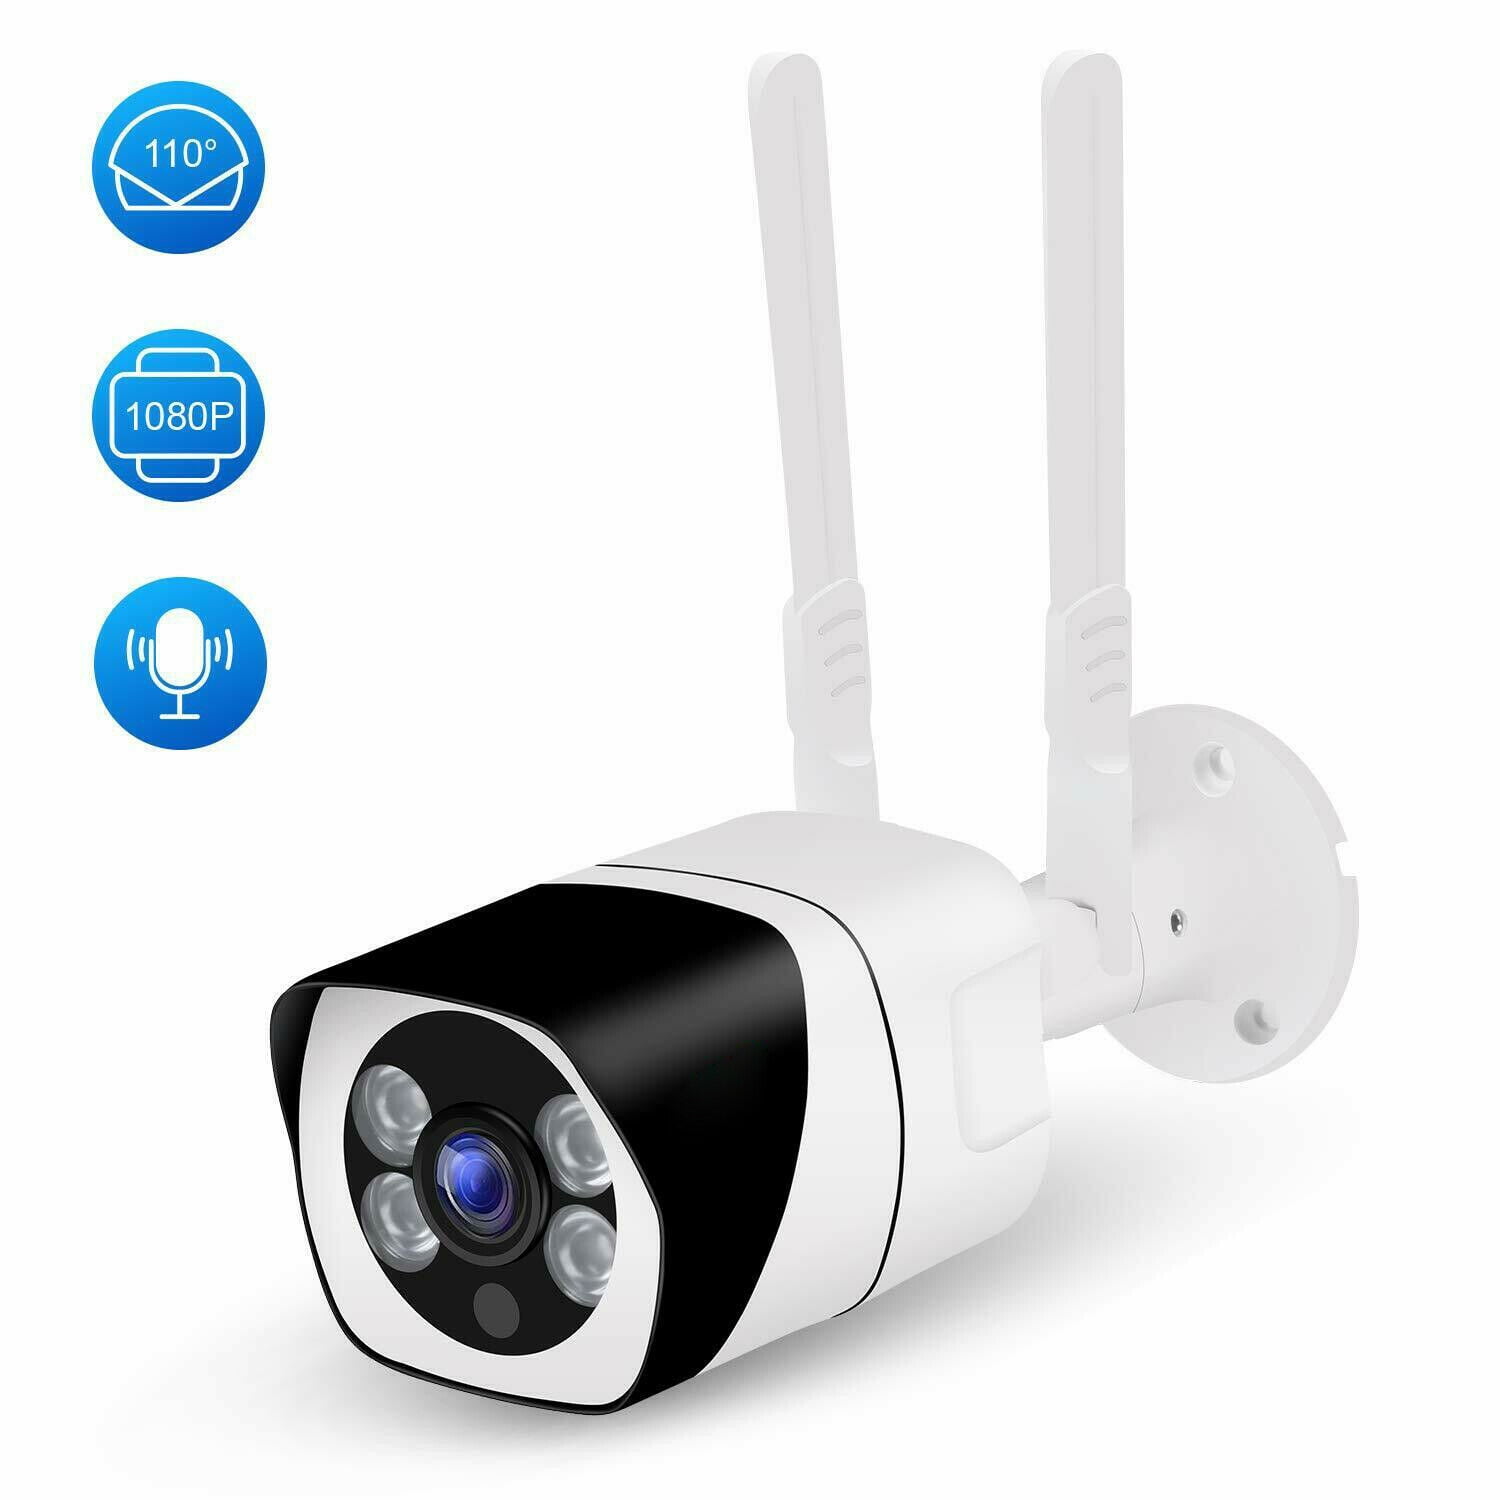 Tagital WiFi Outdoor Security Camera 1080P, 110°Wide Angle, Two-Way ...